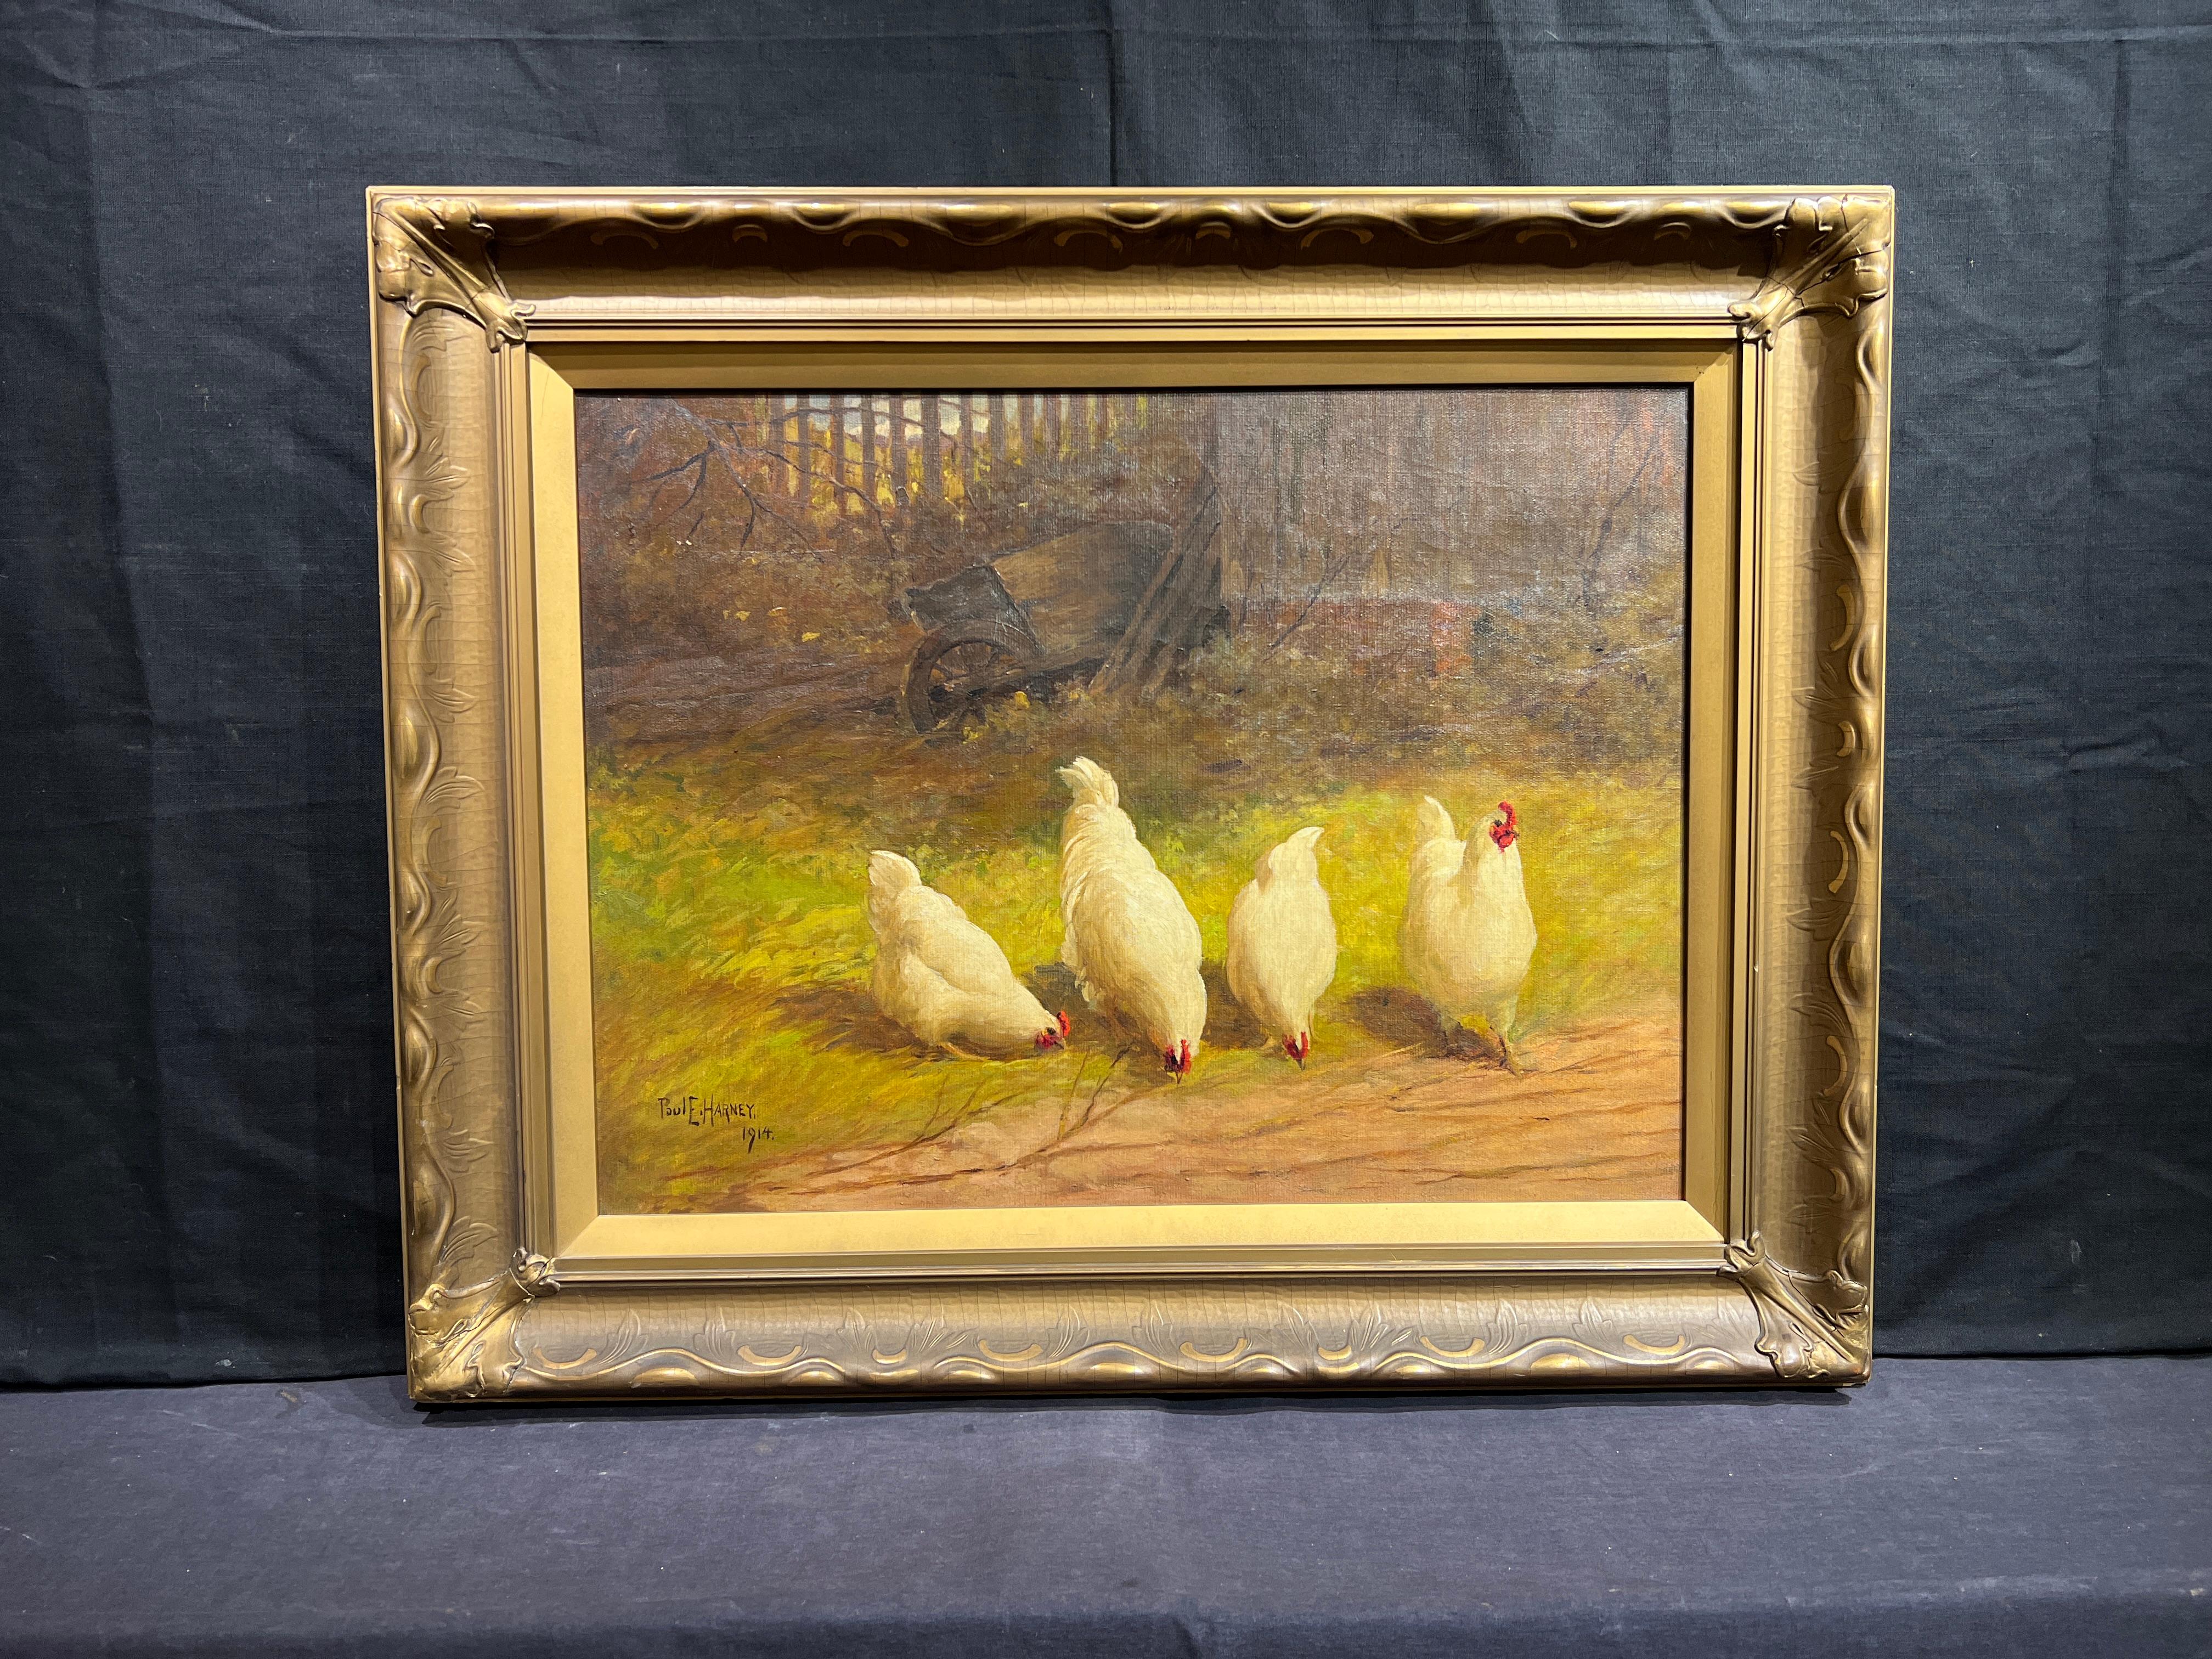 Four White Hens - Painting by Paul E. Harney Jr.